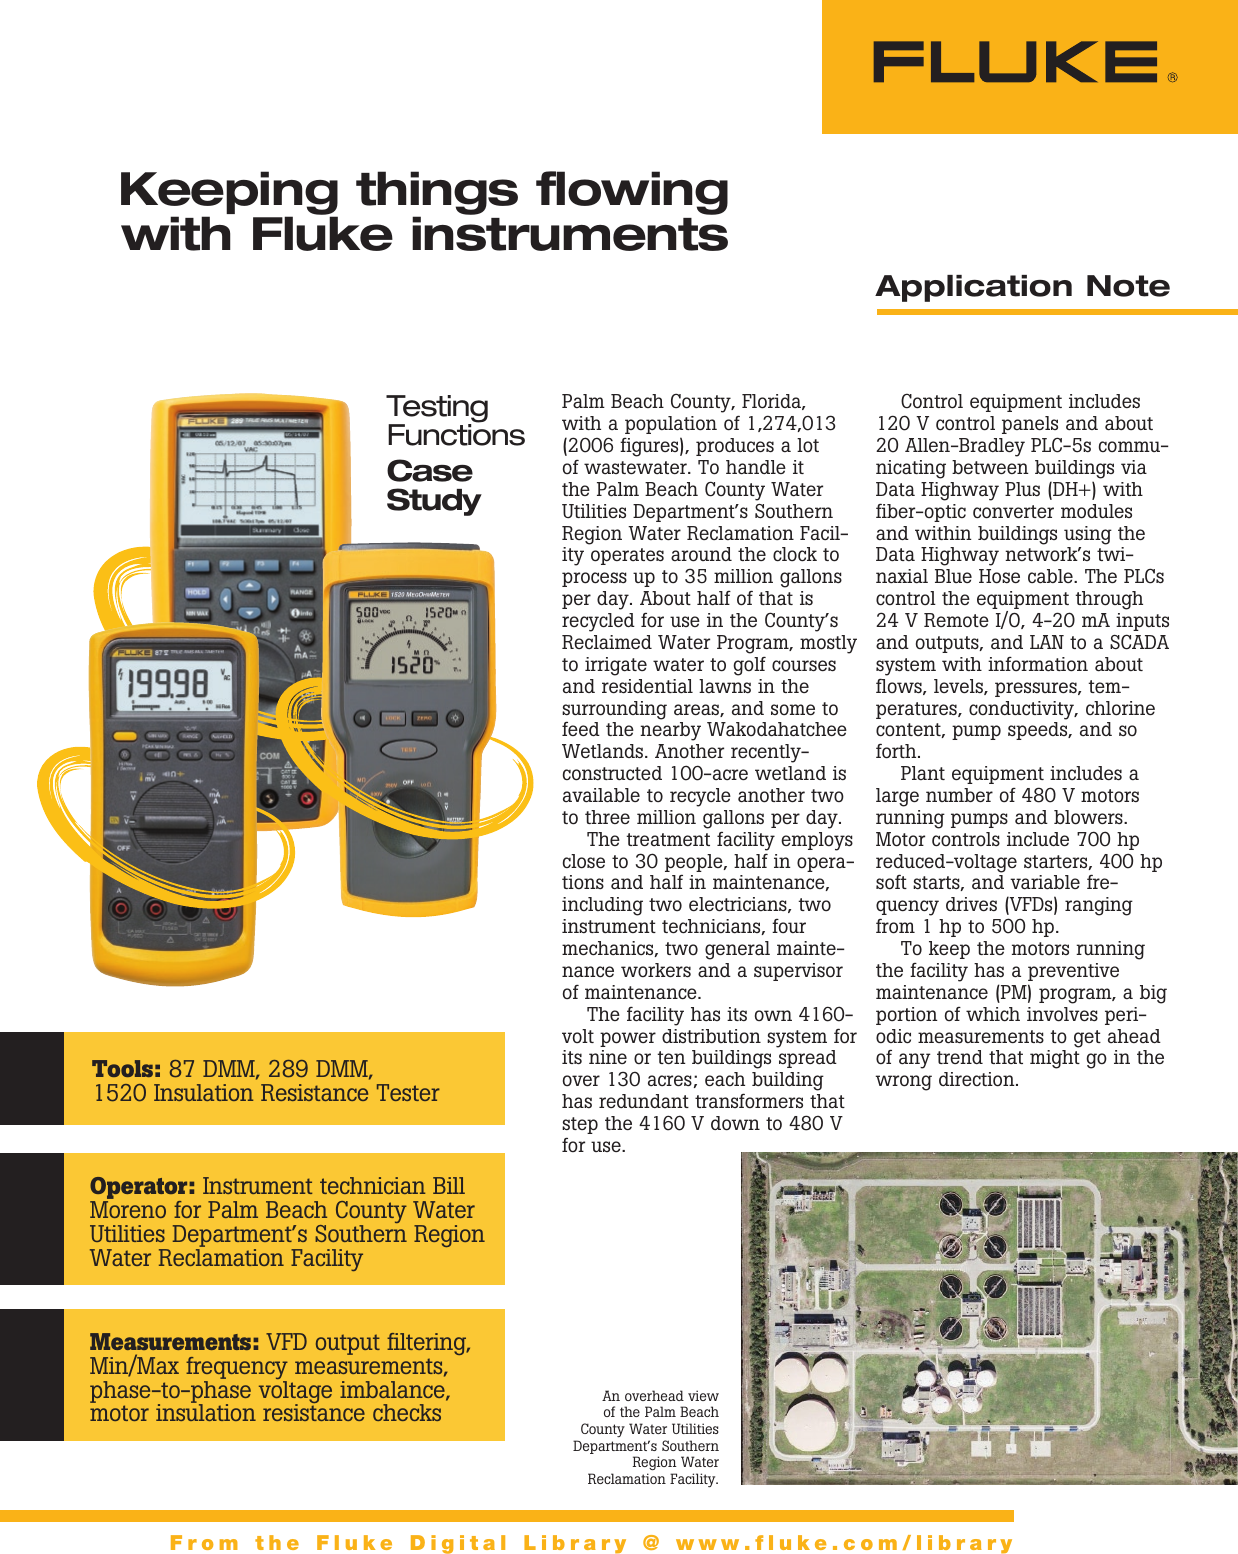 Page 1 of 3 - Fluke Fluke-289-Application-Note- Keeping Things Flowing With Instruments  Fluke-289-application-note